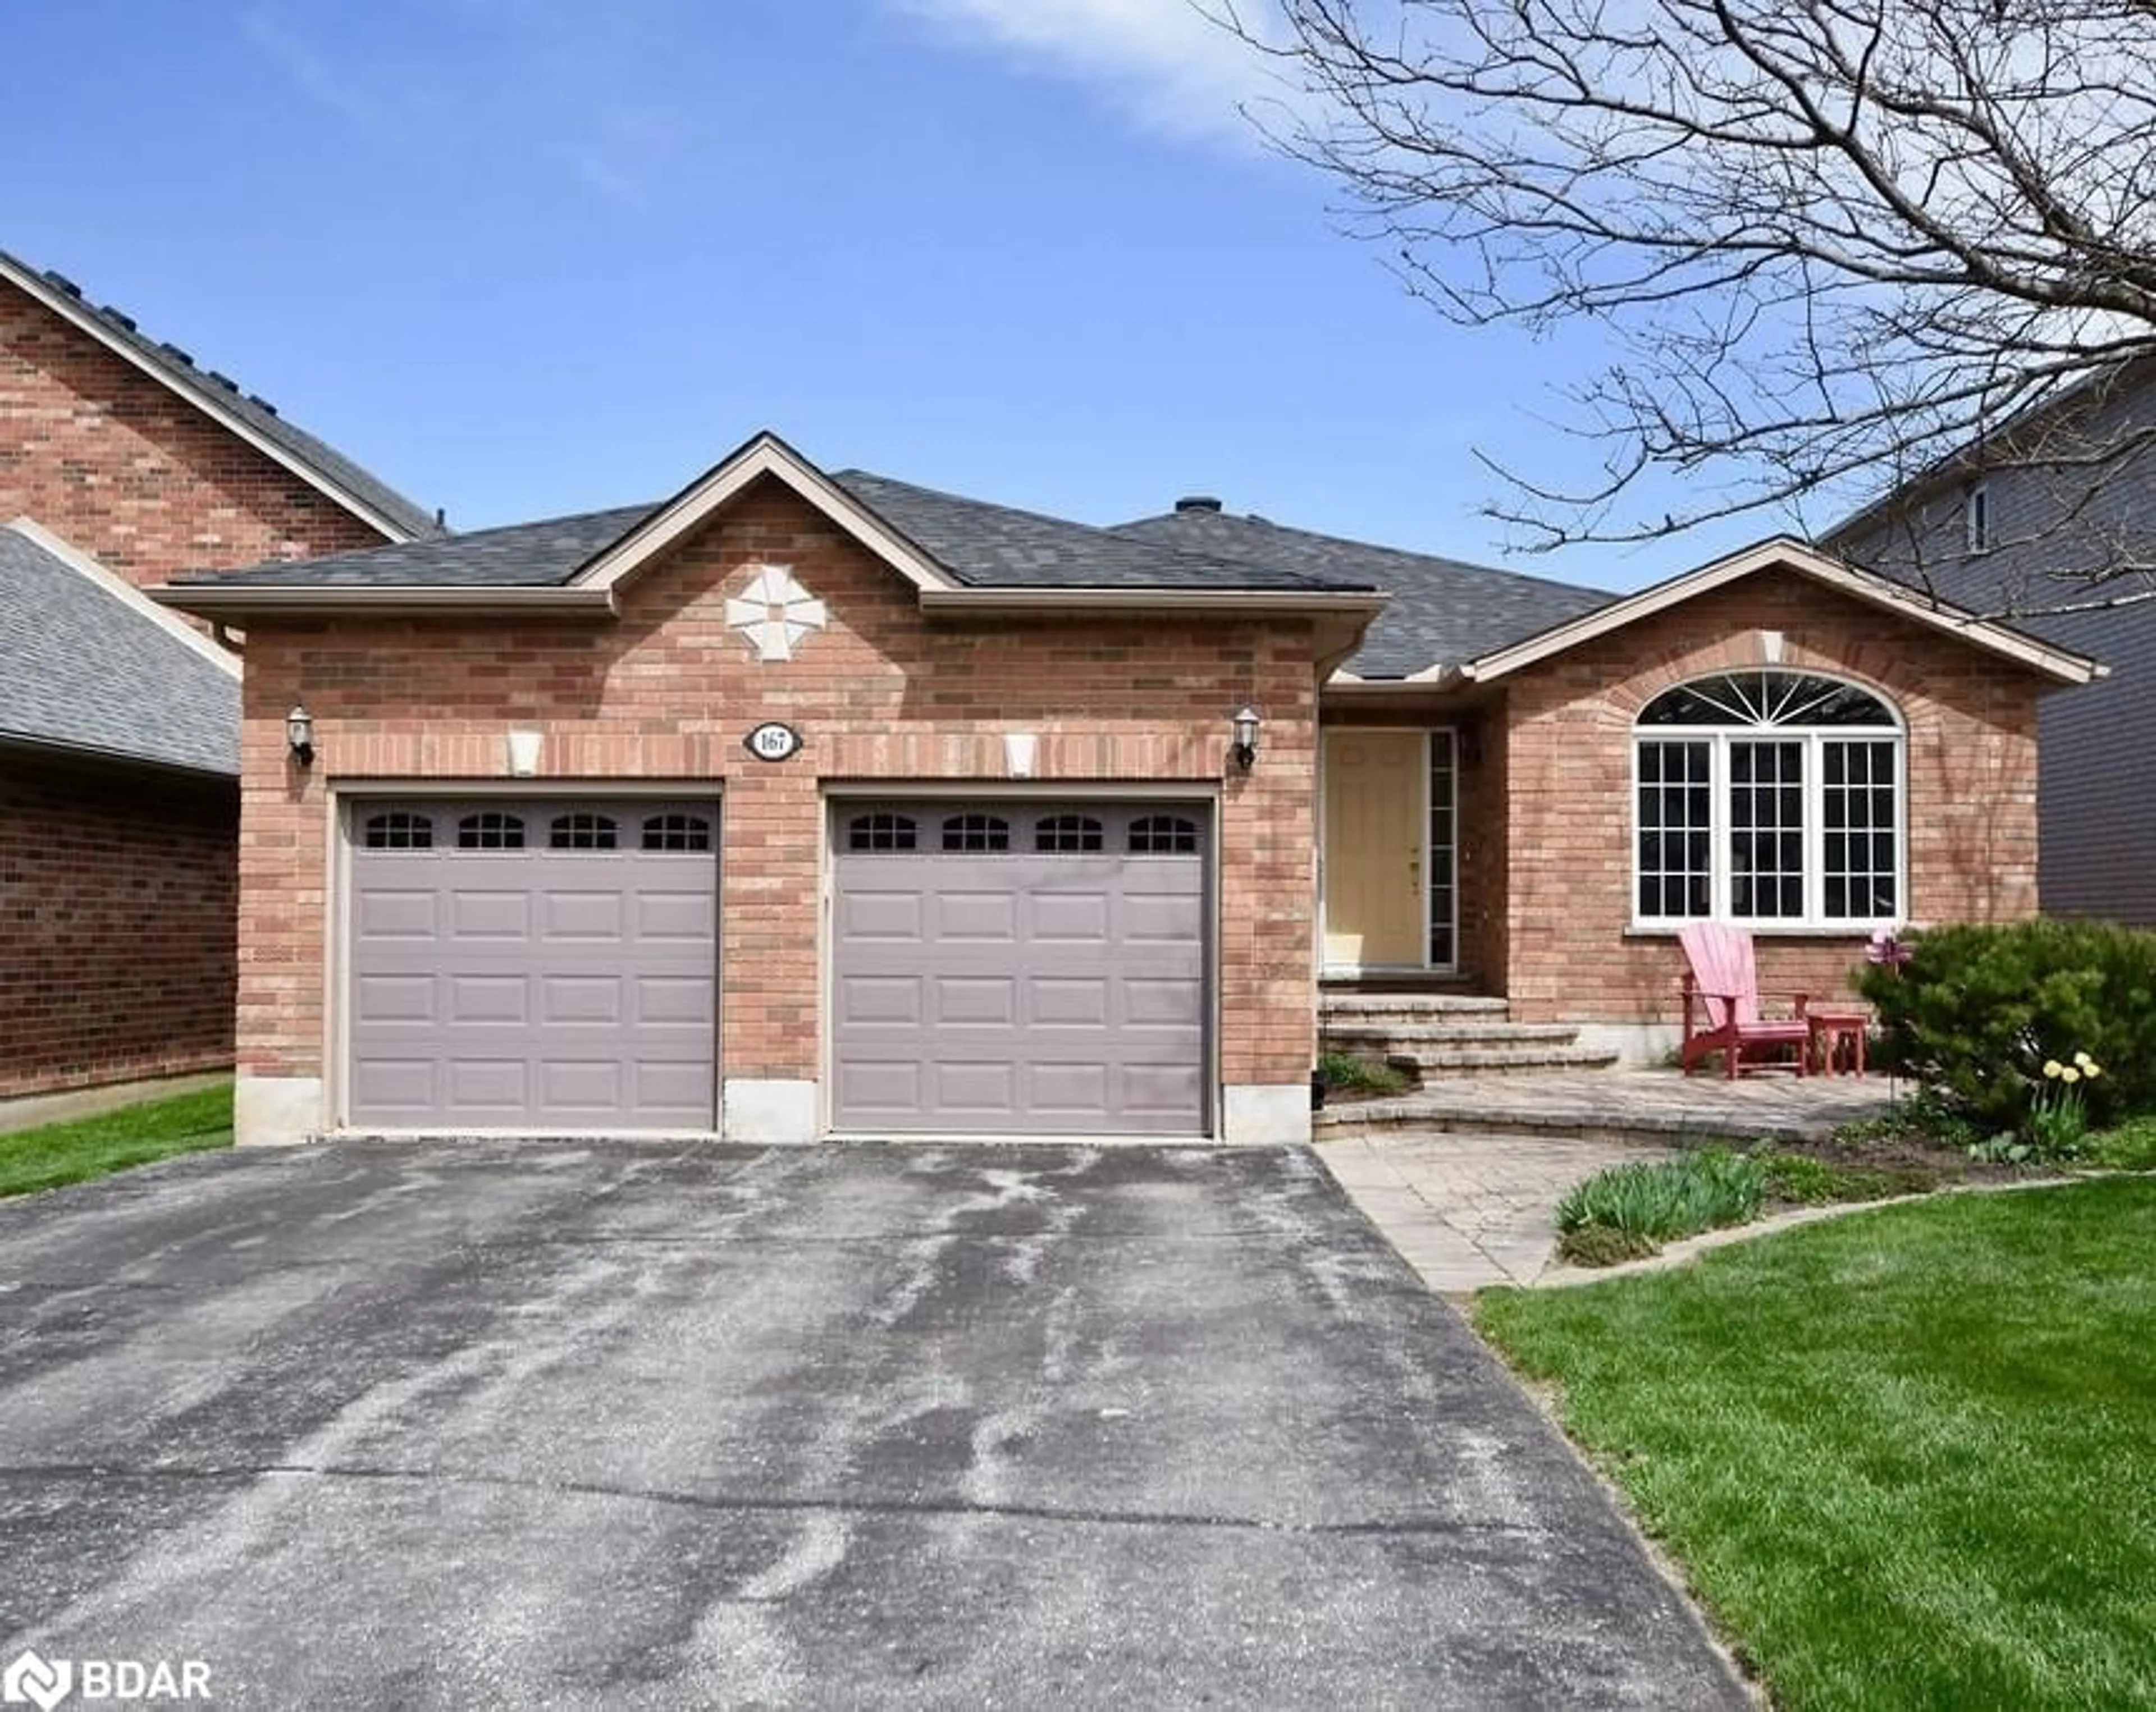 Home with brick exterior material for 167 Crompton Dr, Barrie Ontario L4M 6P1